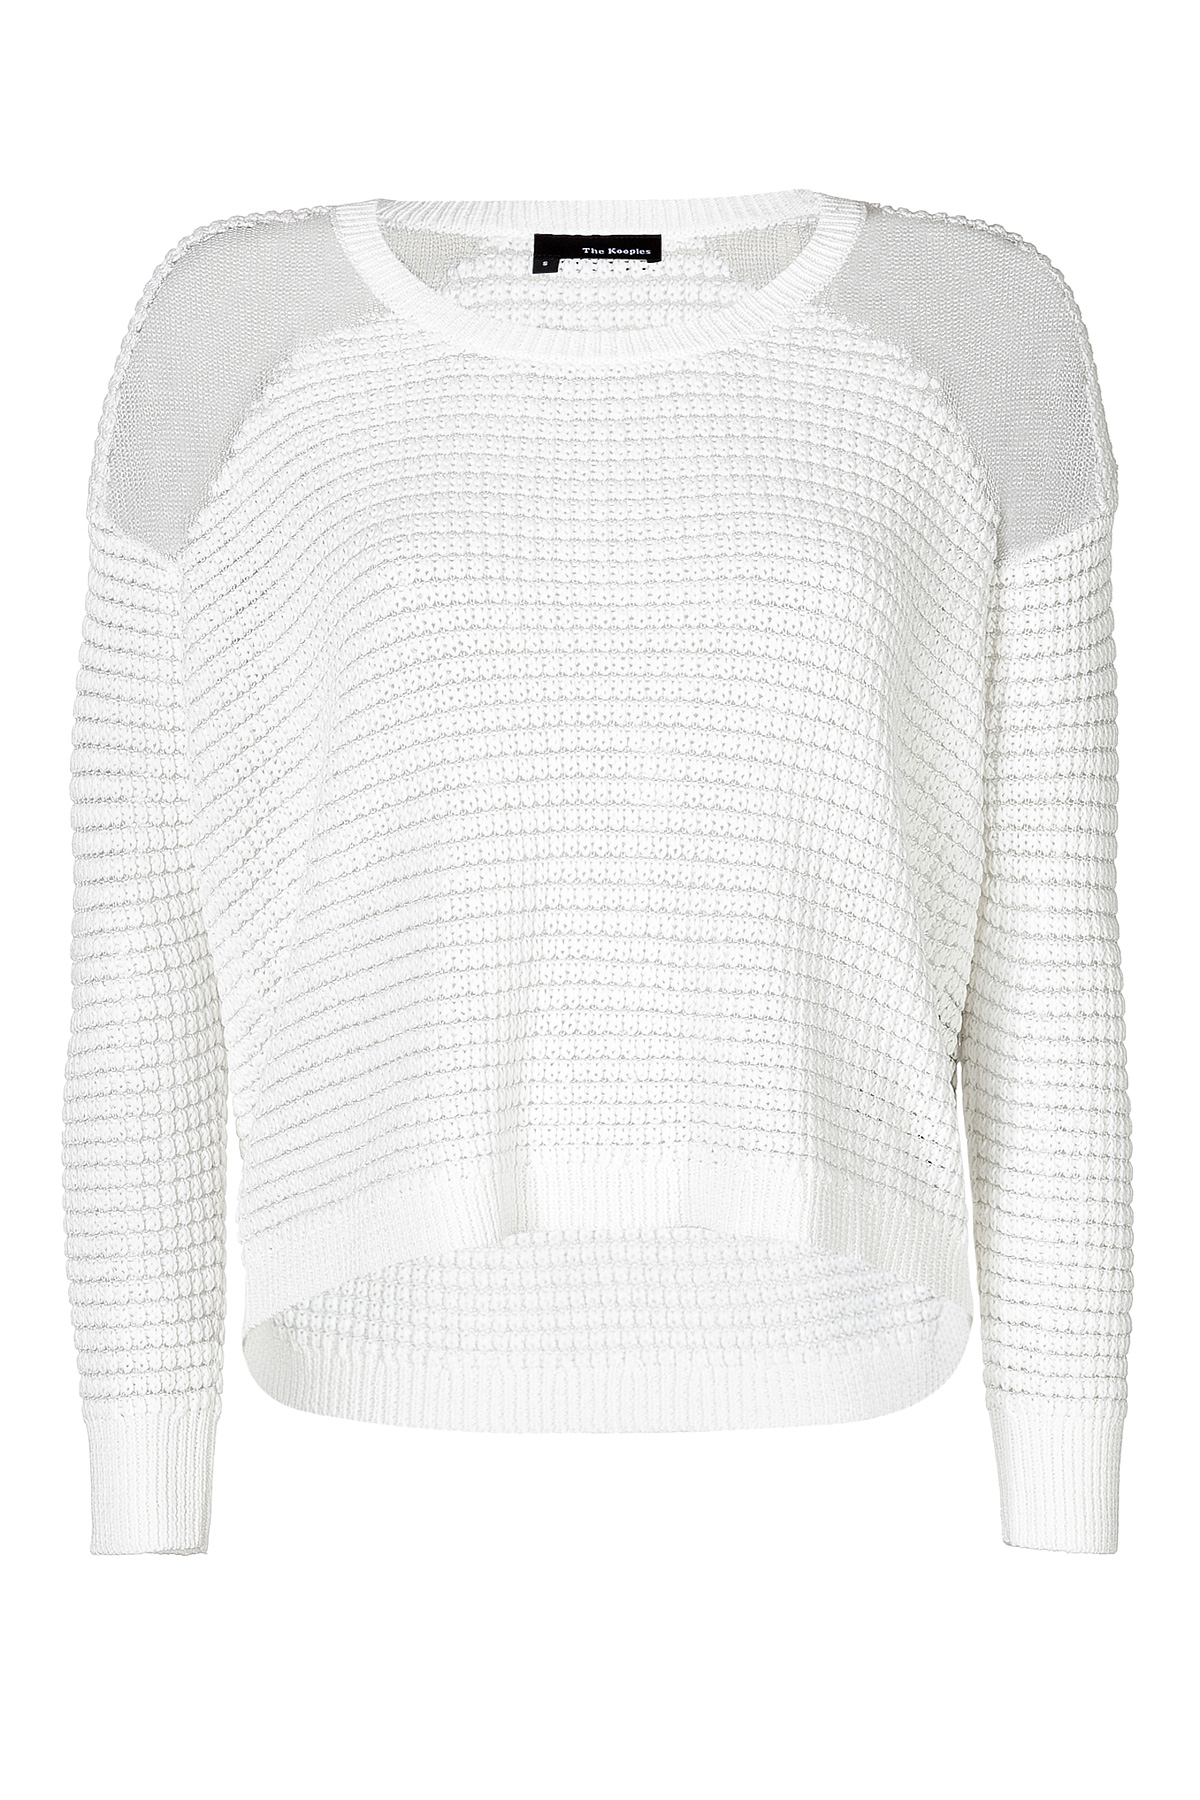 The Kooples Cotton Chunky Knit Pullover with Sheer Shoulders in White ...